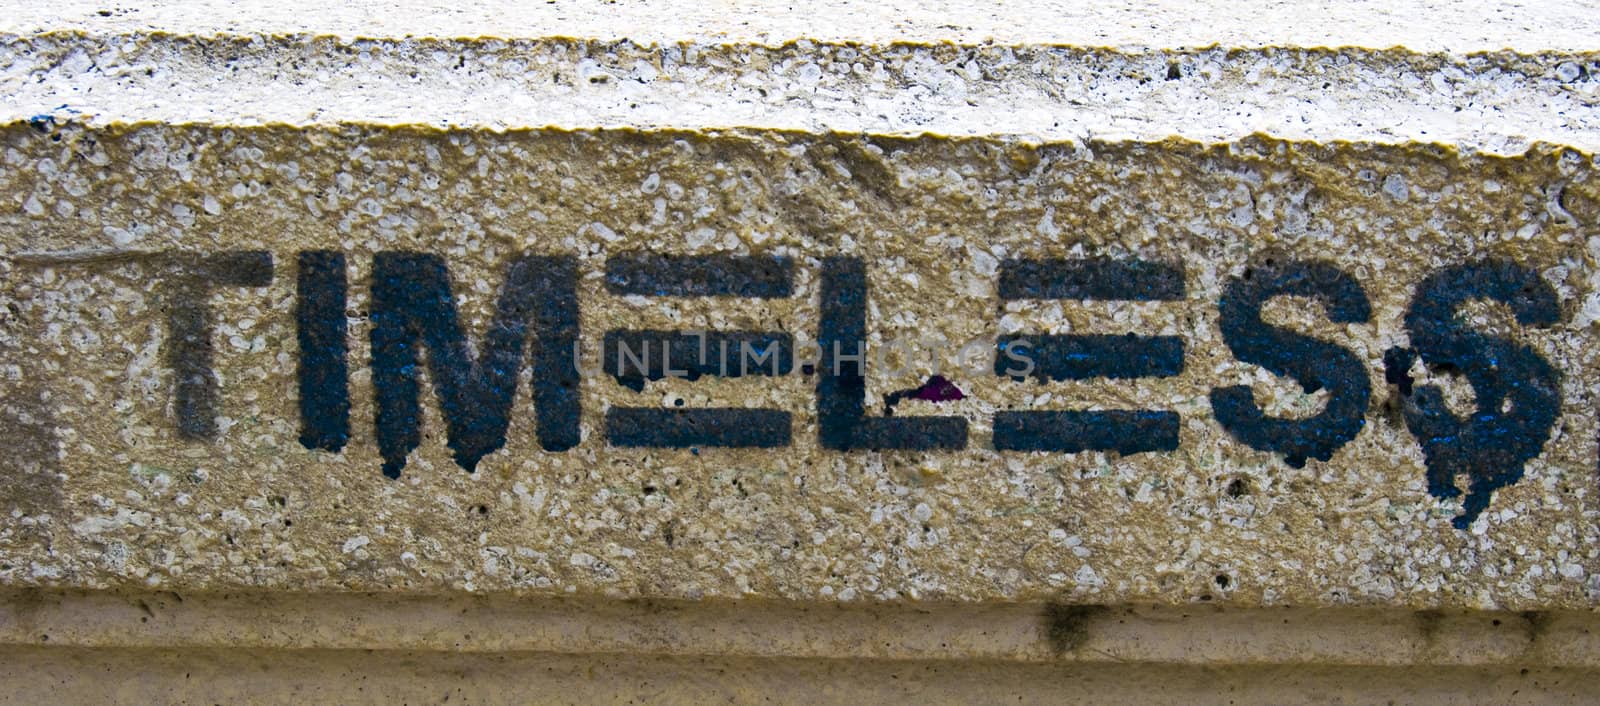 graffiti of the word timeless on a brown wall